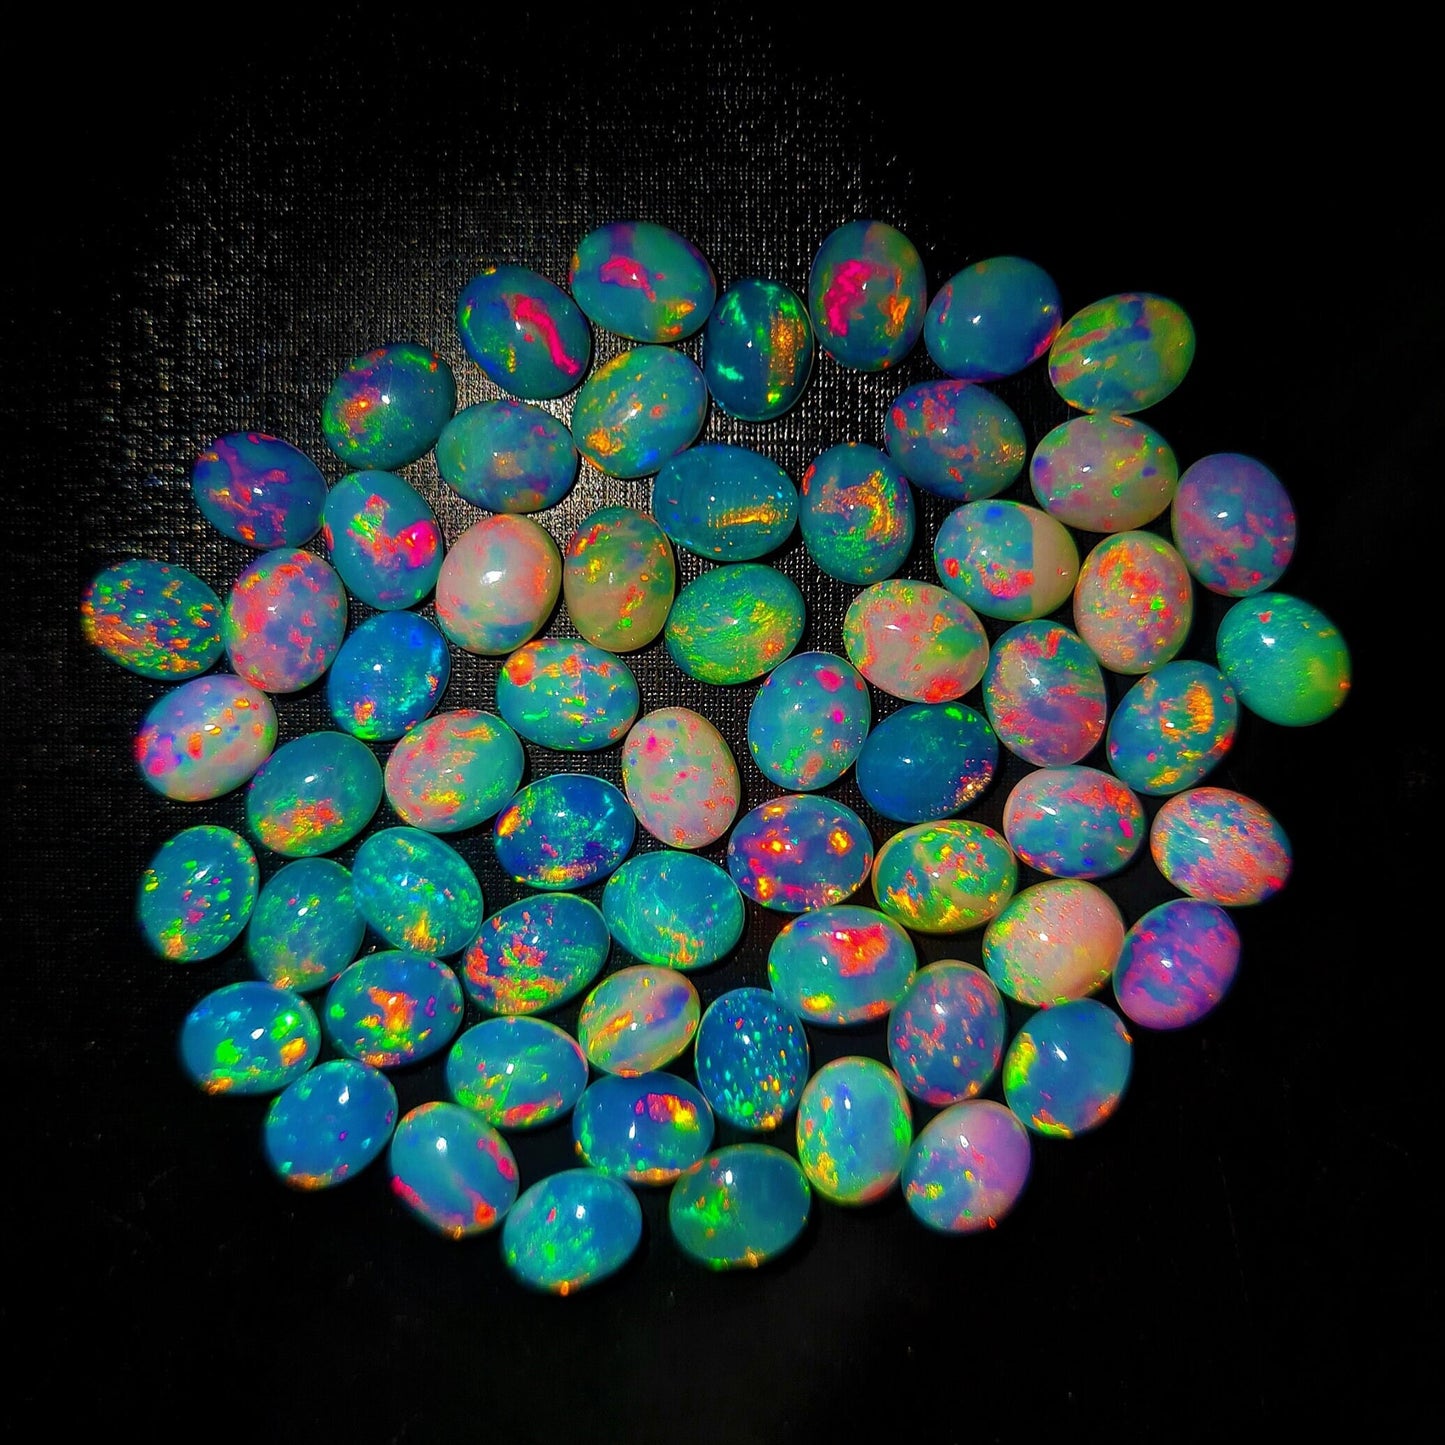 Natural Ethiopian Opal 8x10 mm Oval Gemstone Cabochon, Calibrated Opal Stone, Multi Fire Opal Loose Stone For Jewelry Making. (Natural)